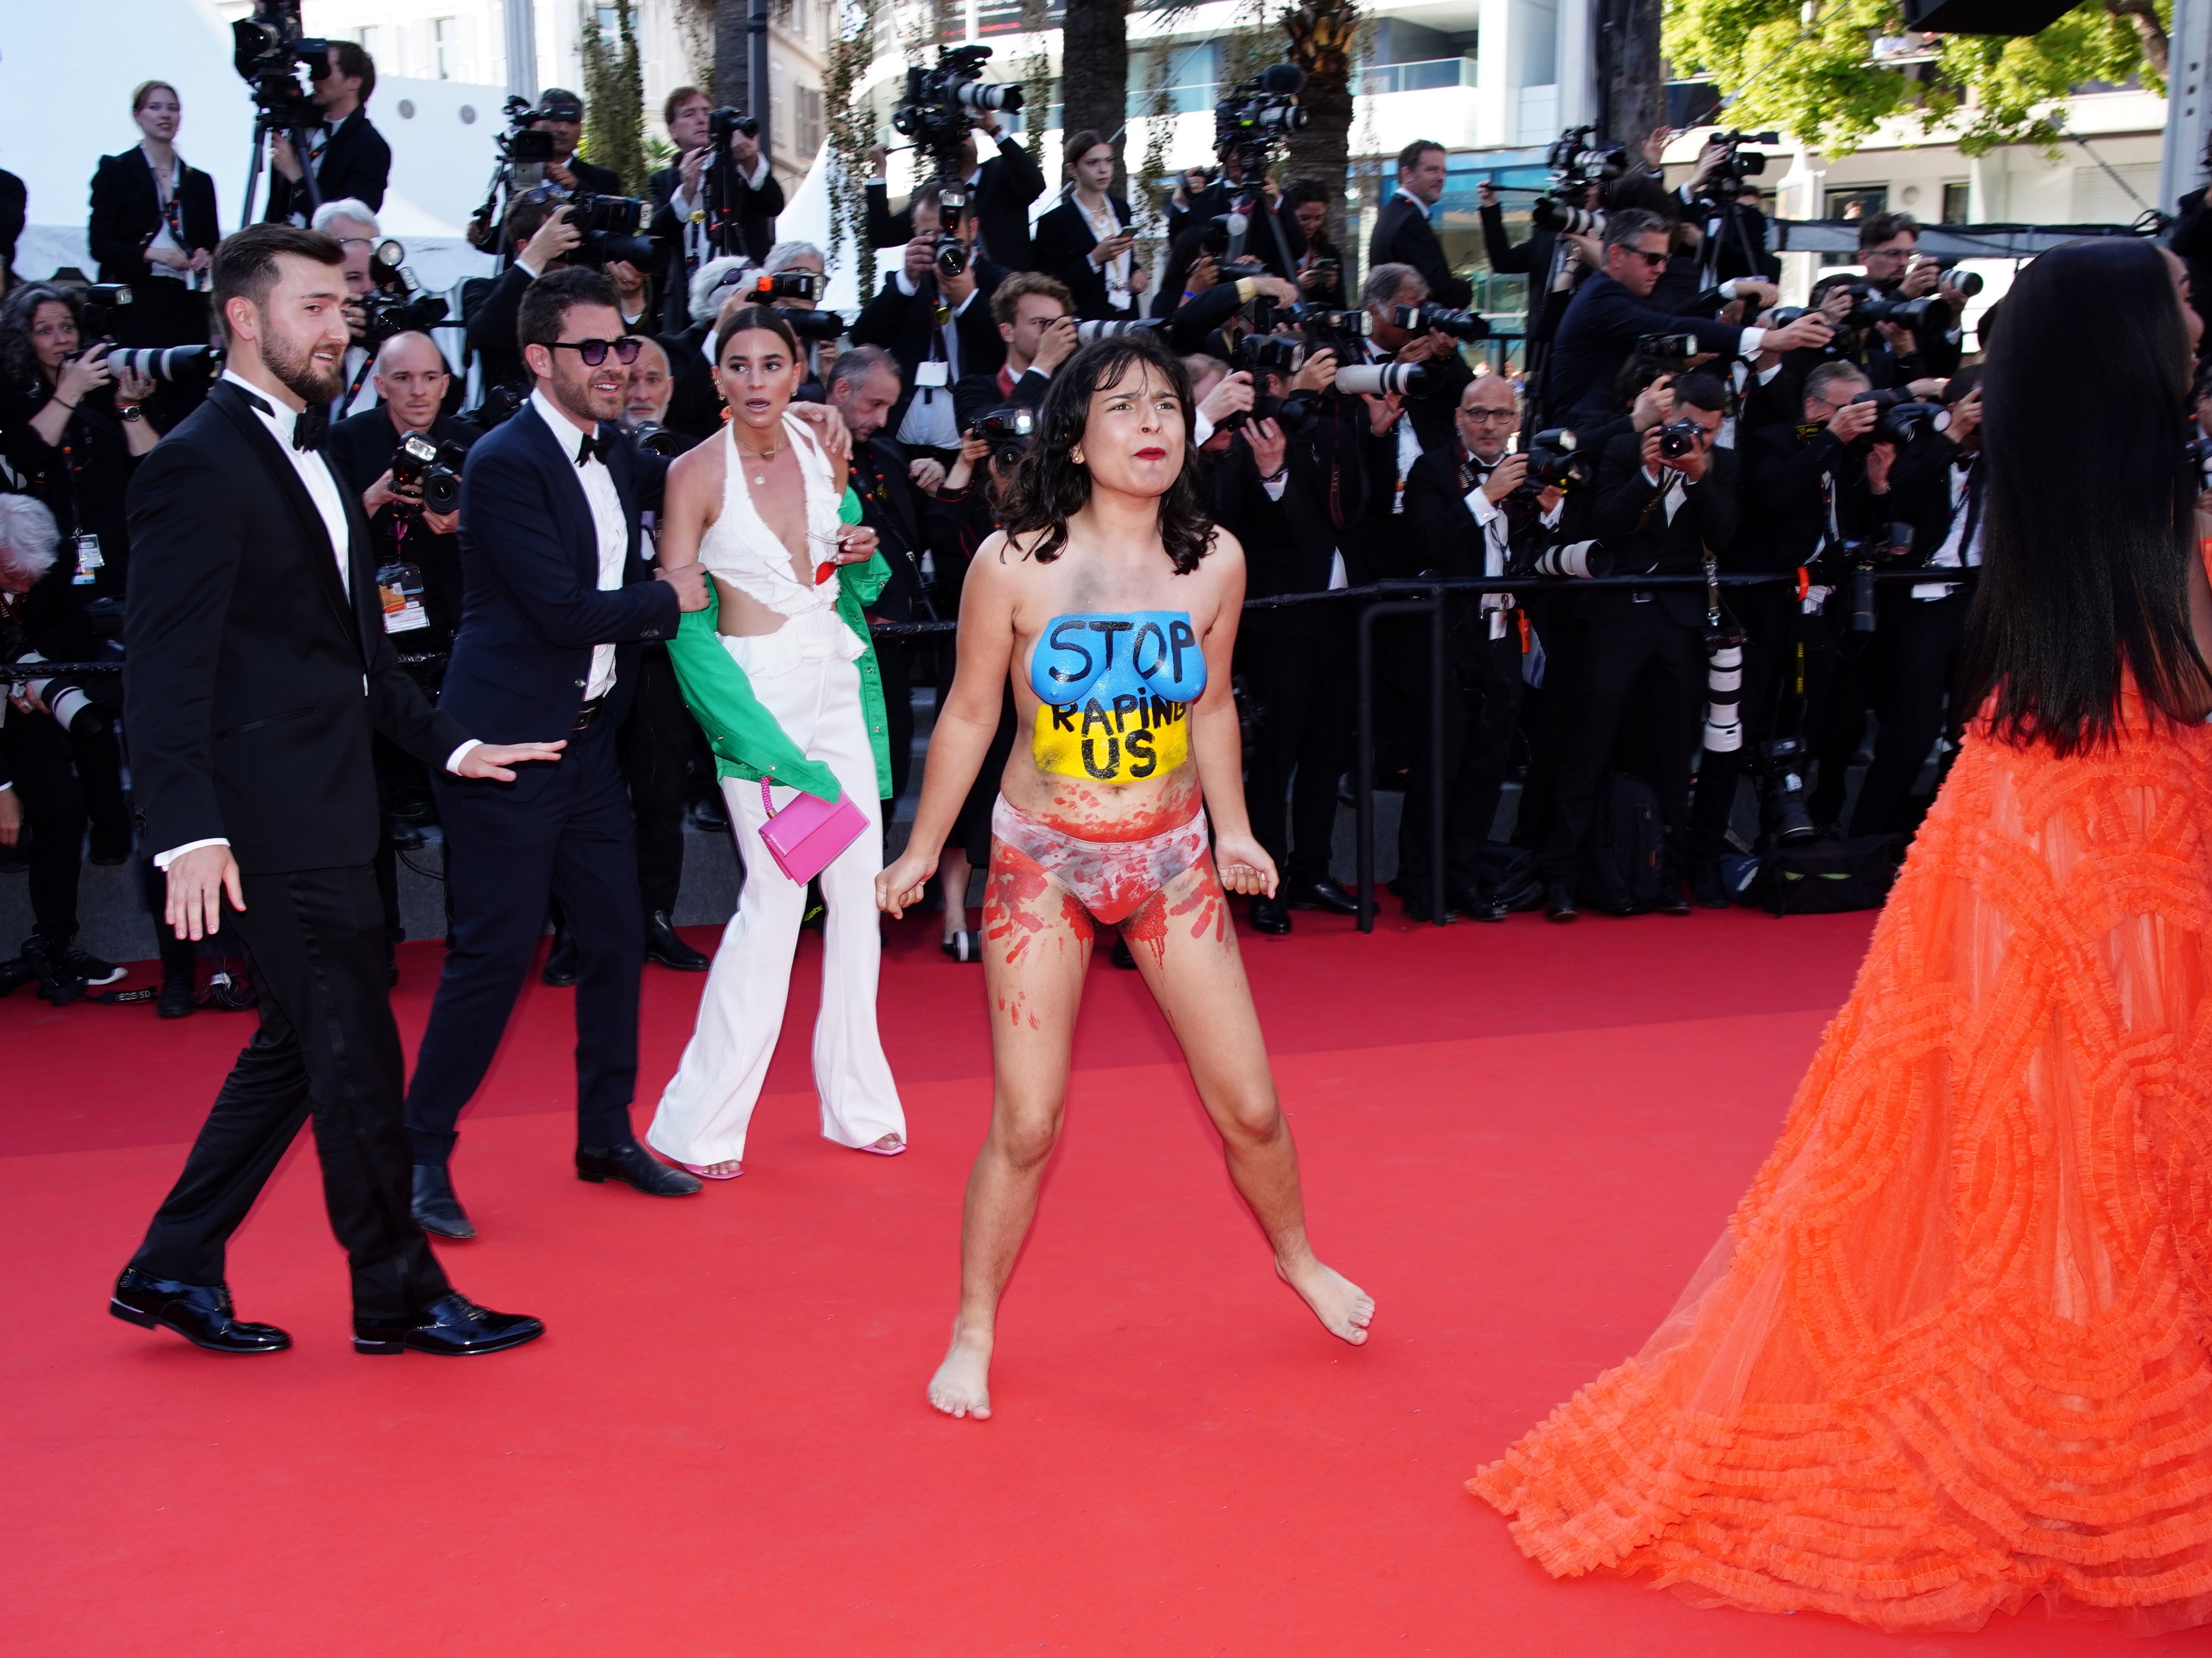 Ukraine protestor removed from Cannes by security after stripping on the red carpet The Independent image